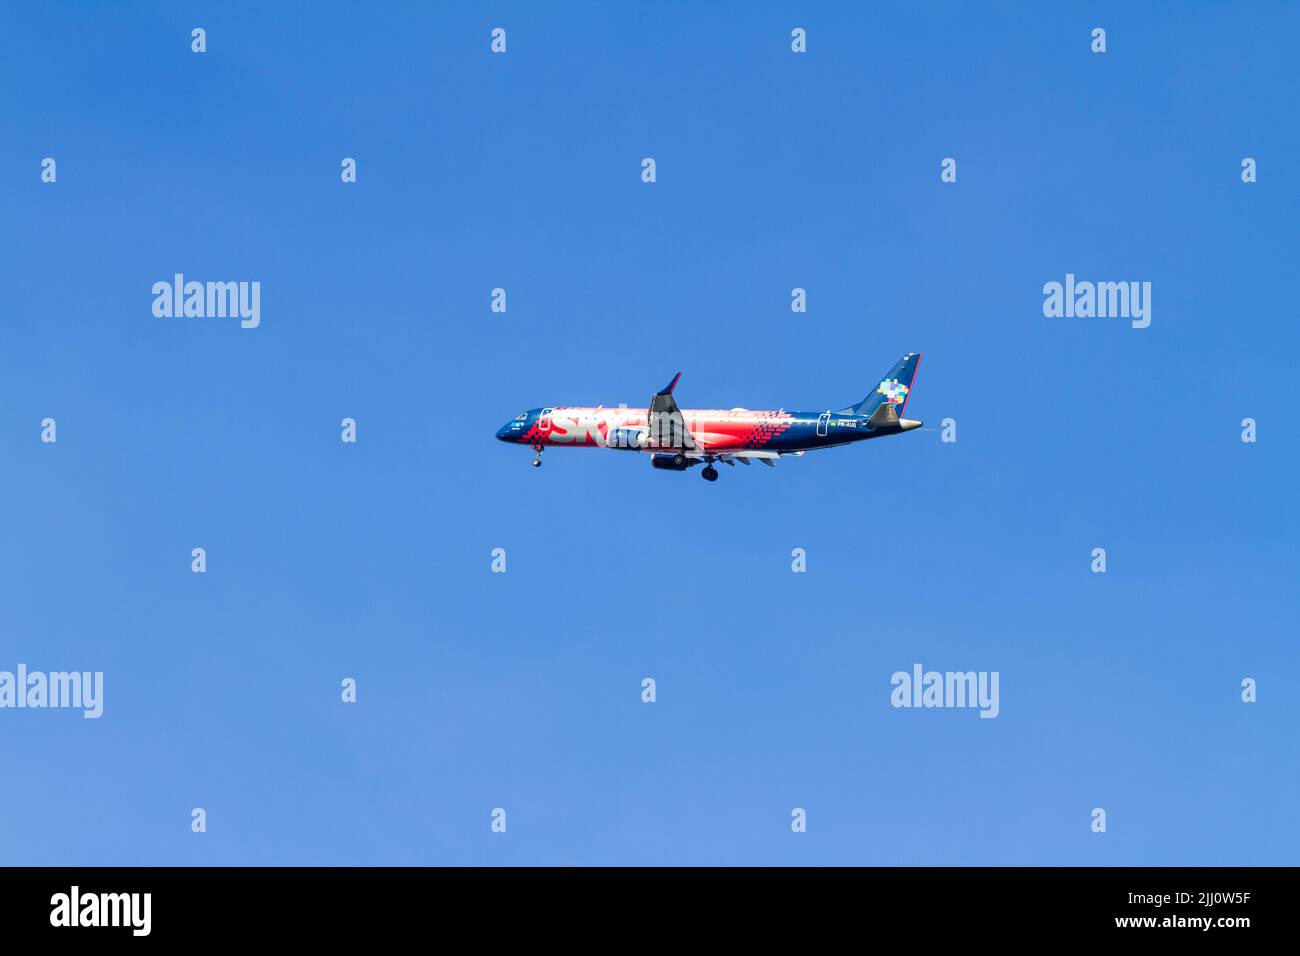 Blue Airlines plane in the sky of Rio de Janeiro, Brazil - June 05, 2022 : Blue Airlines plane flying at Santos Dumont airport in Rio de Janeiro. Stock Photo